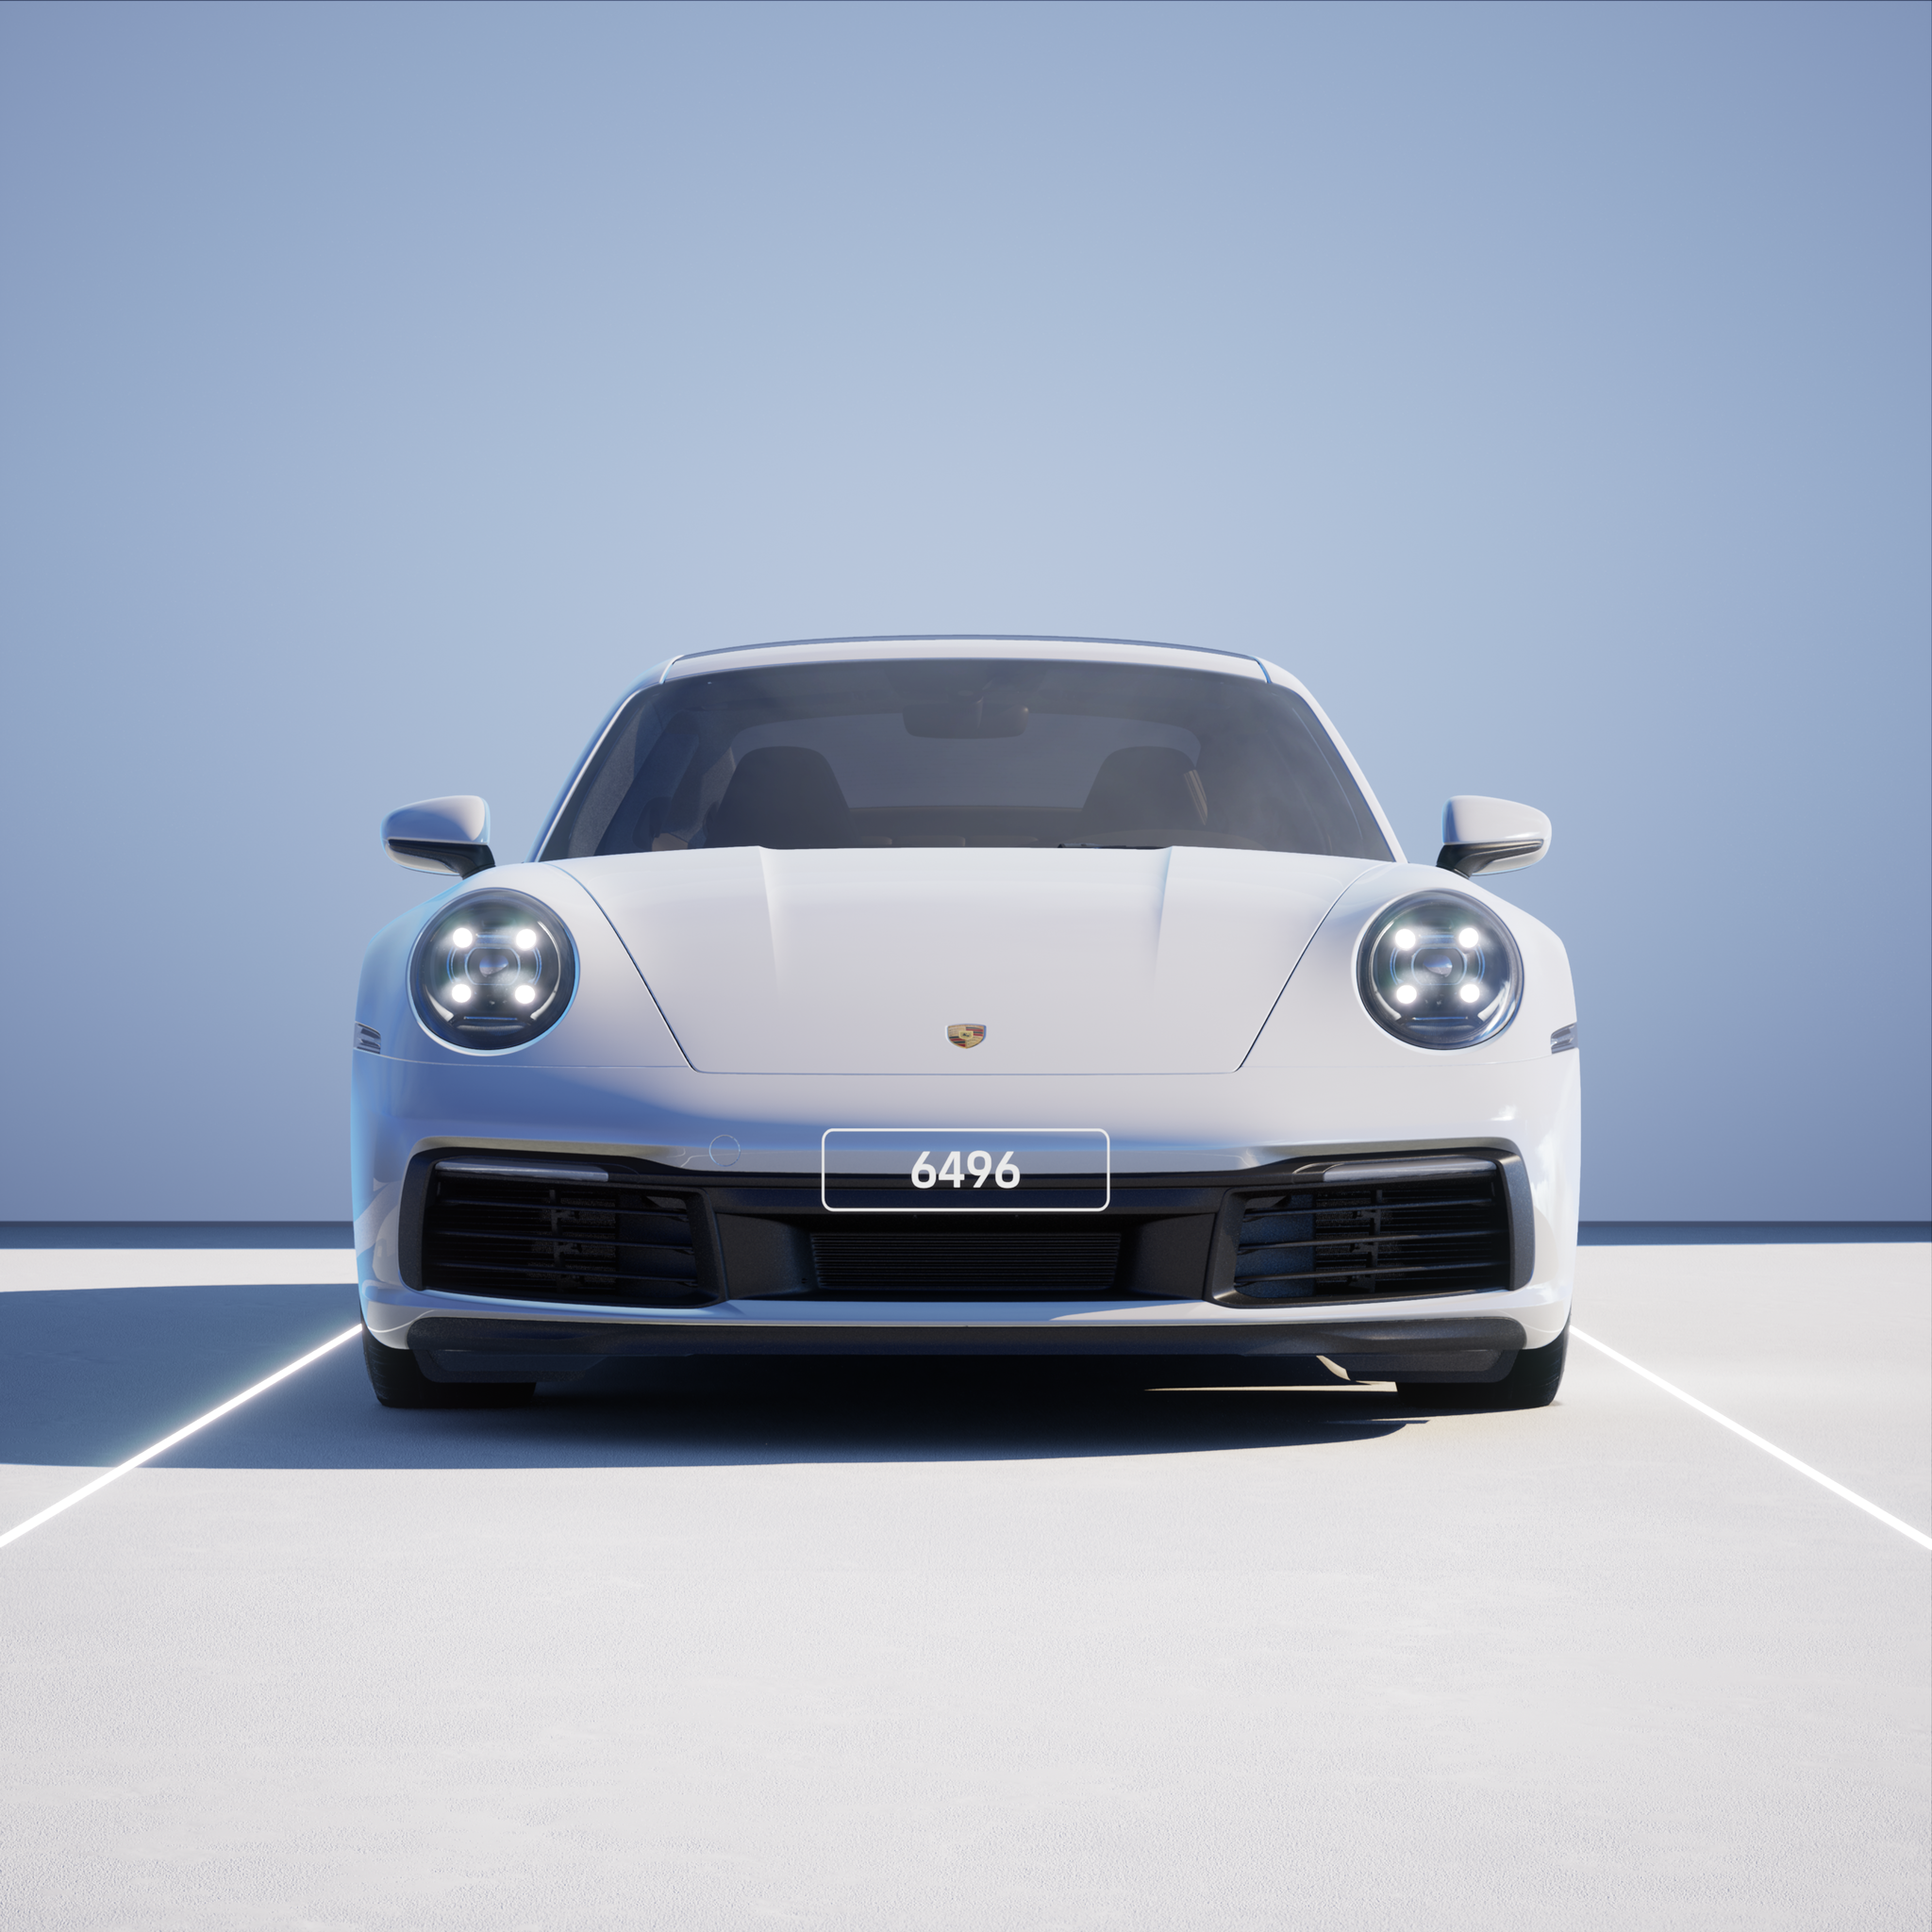 The PORSCHΞ 911 6496 image in phase